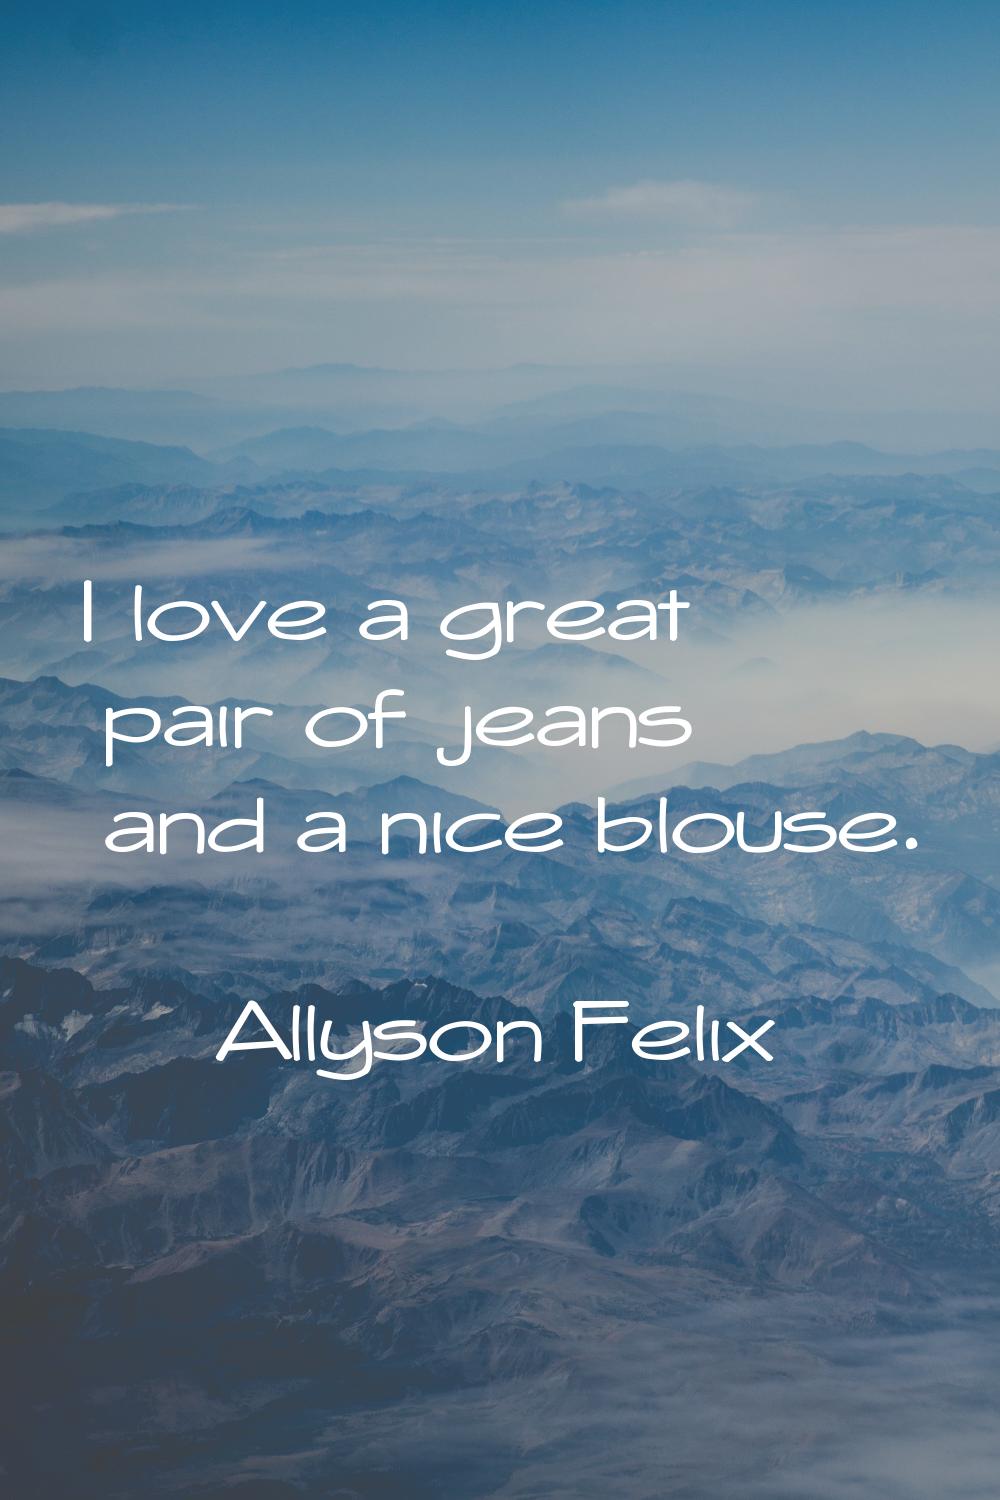 I love a great pair of jeans and a nice blouse.